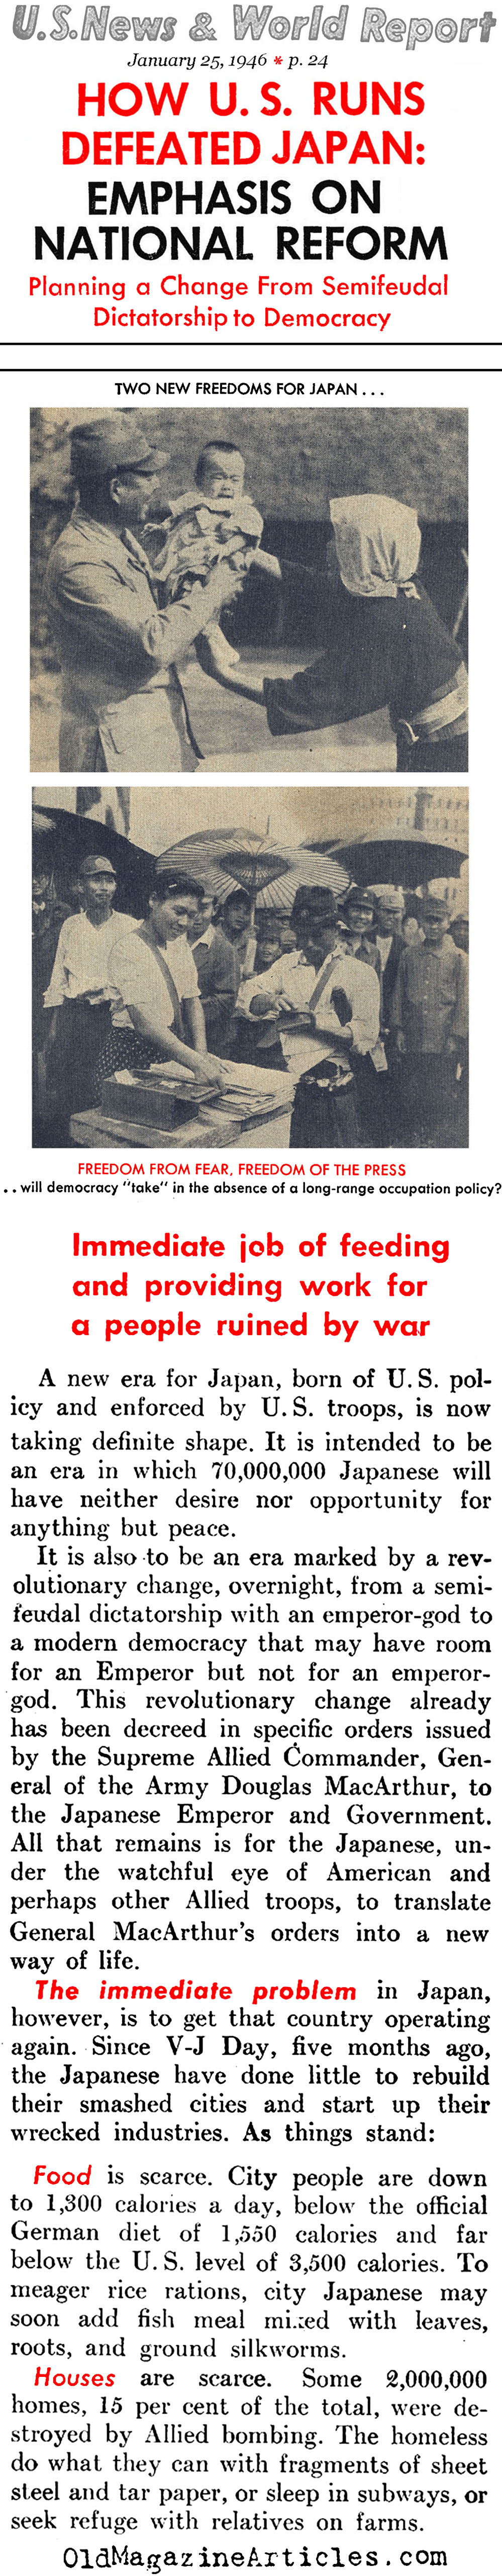 Reforms in Post-Fascist Japan (United States News, 1946)